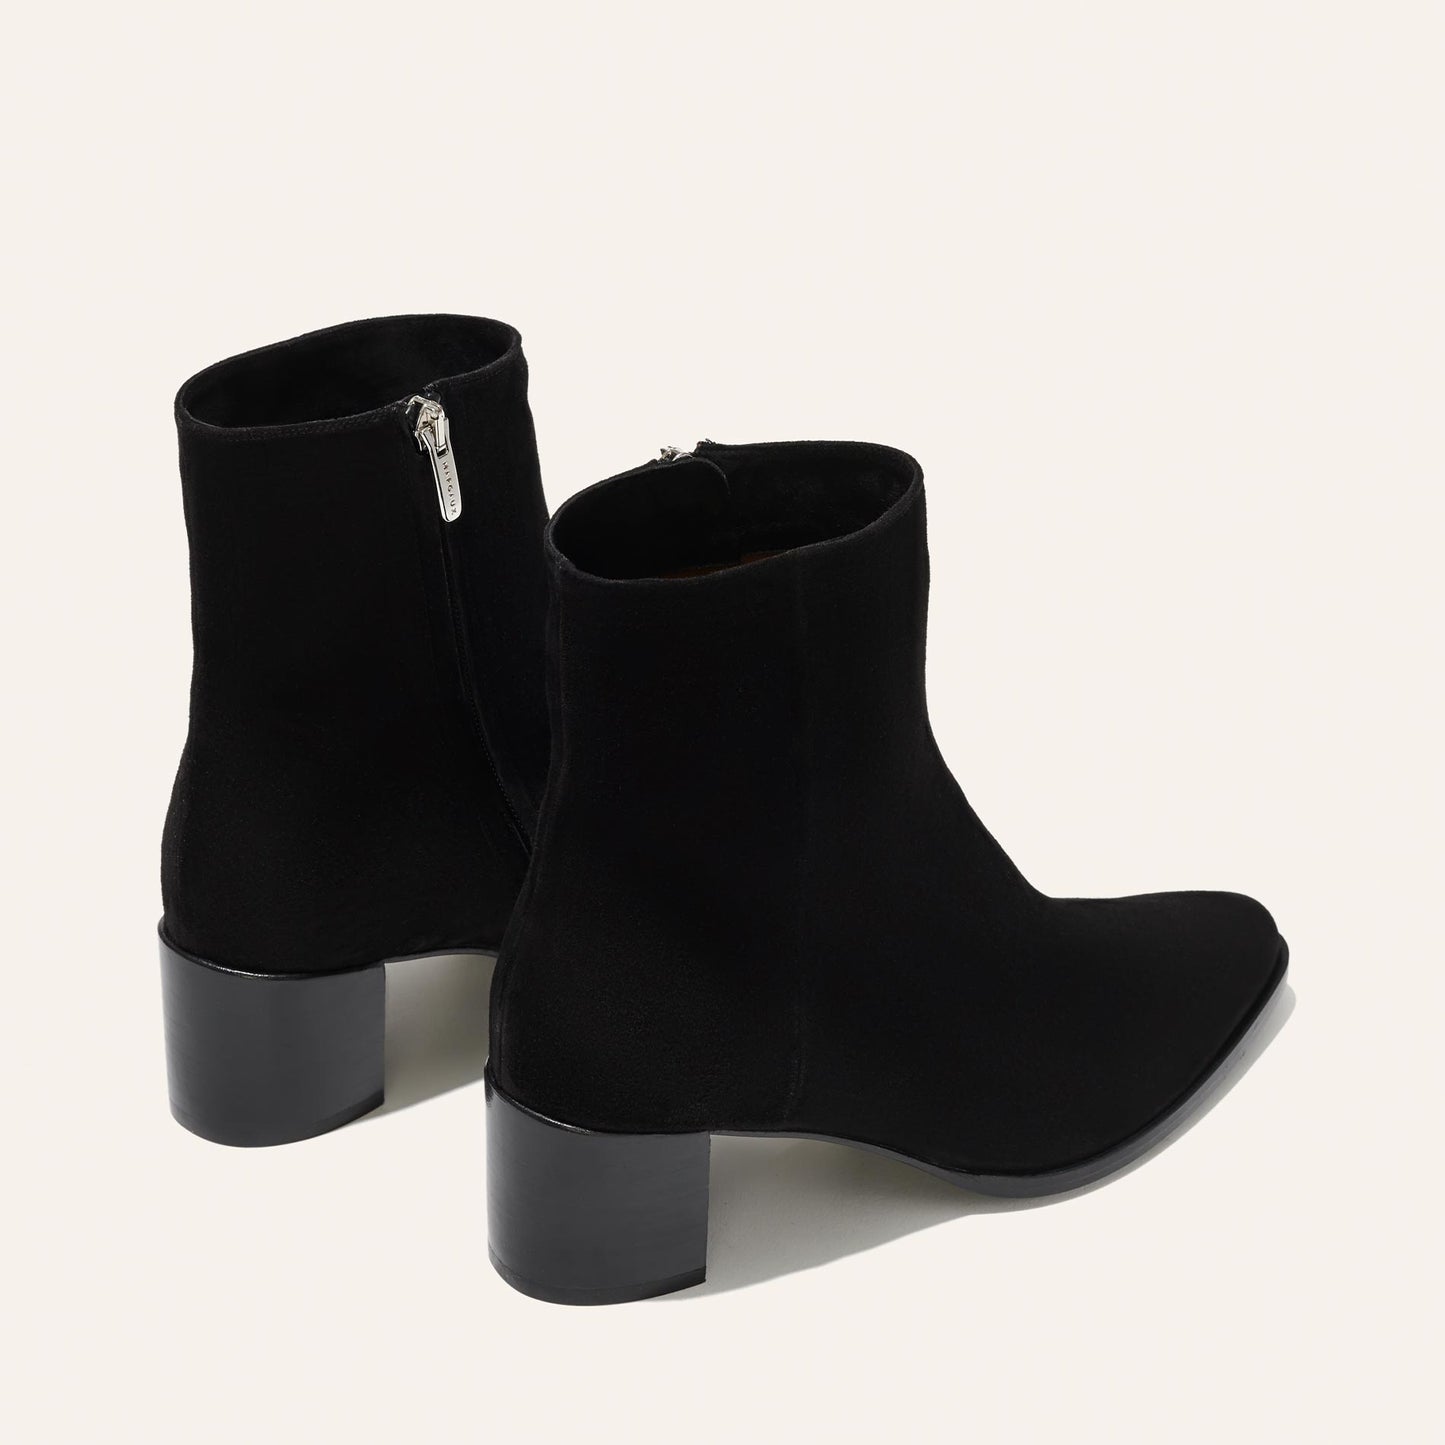 The Downtown Boot - Black Suede